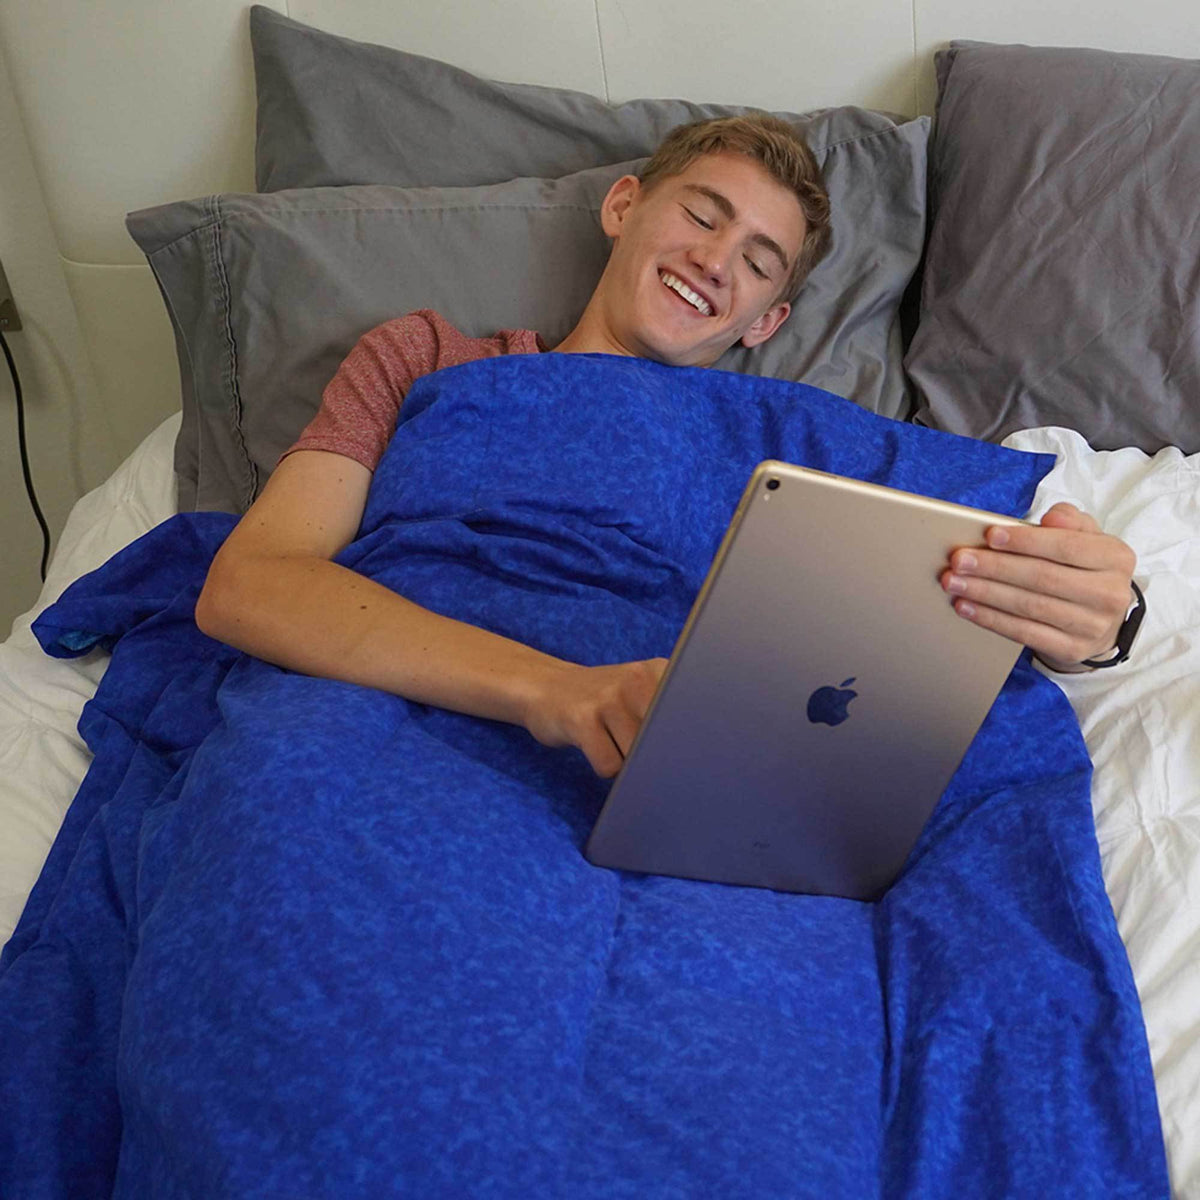 Man reads from his iPad under the covers of his Navy Blue Weighted Blanket in bed